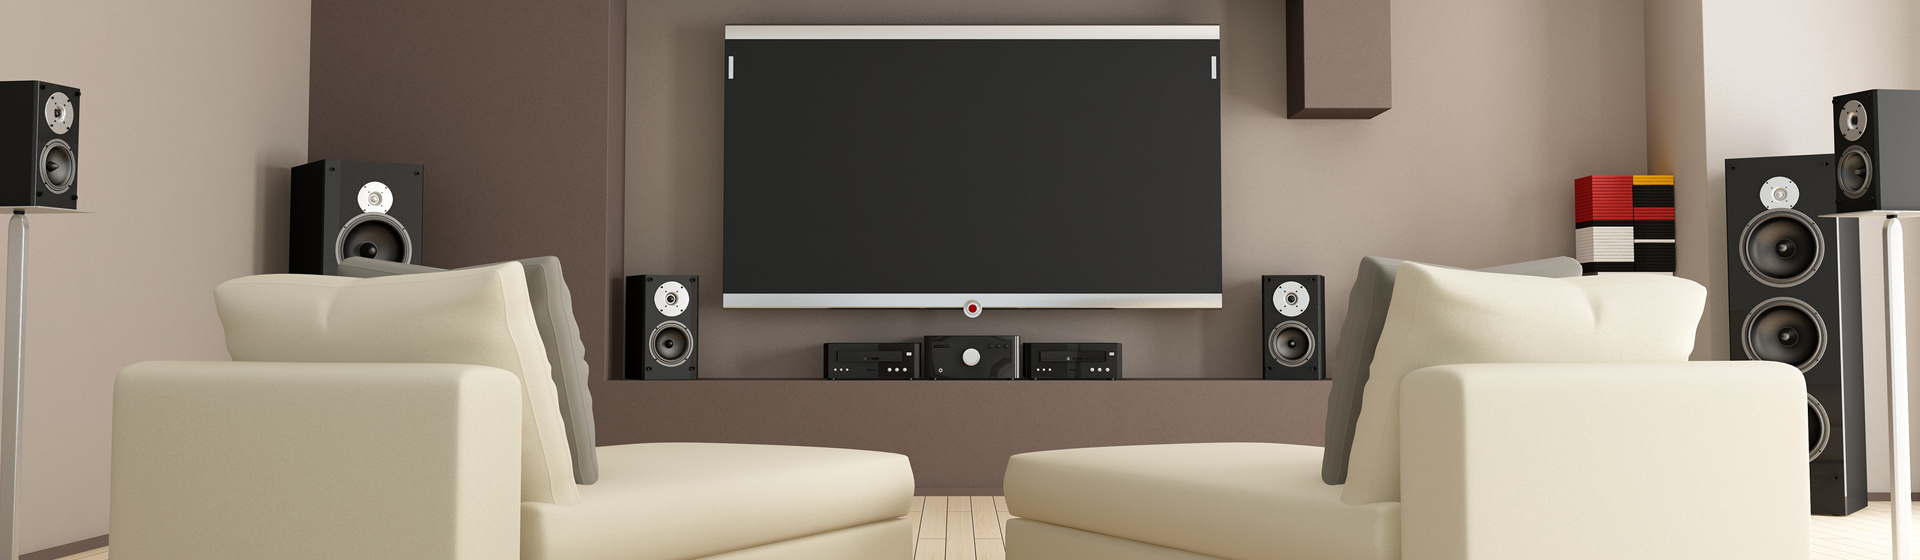 home theater installation pros near tampa bay fl 